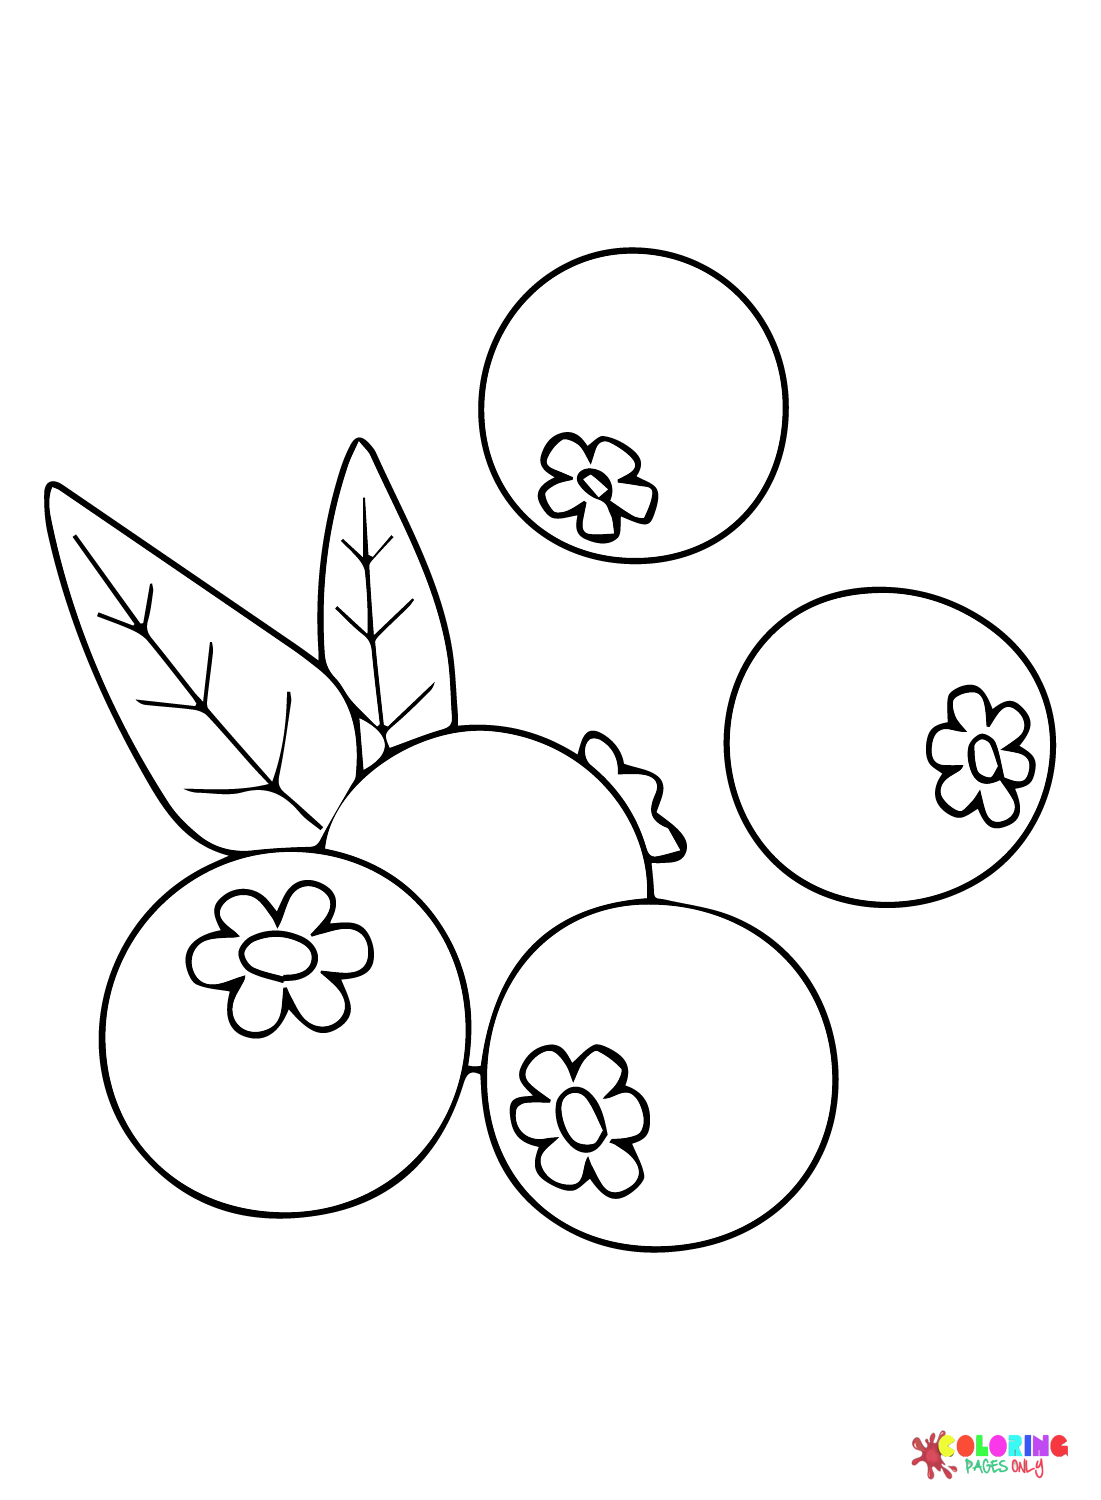 Free Blueberry Coloring Page